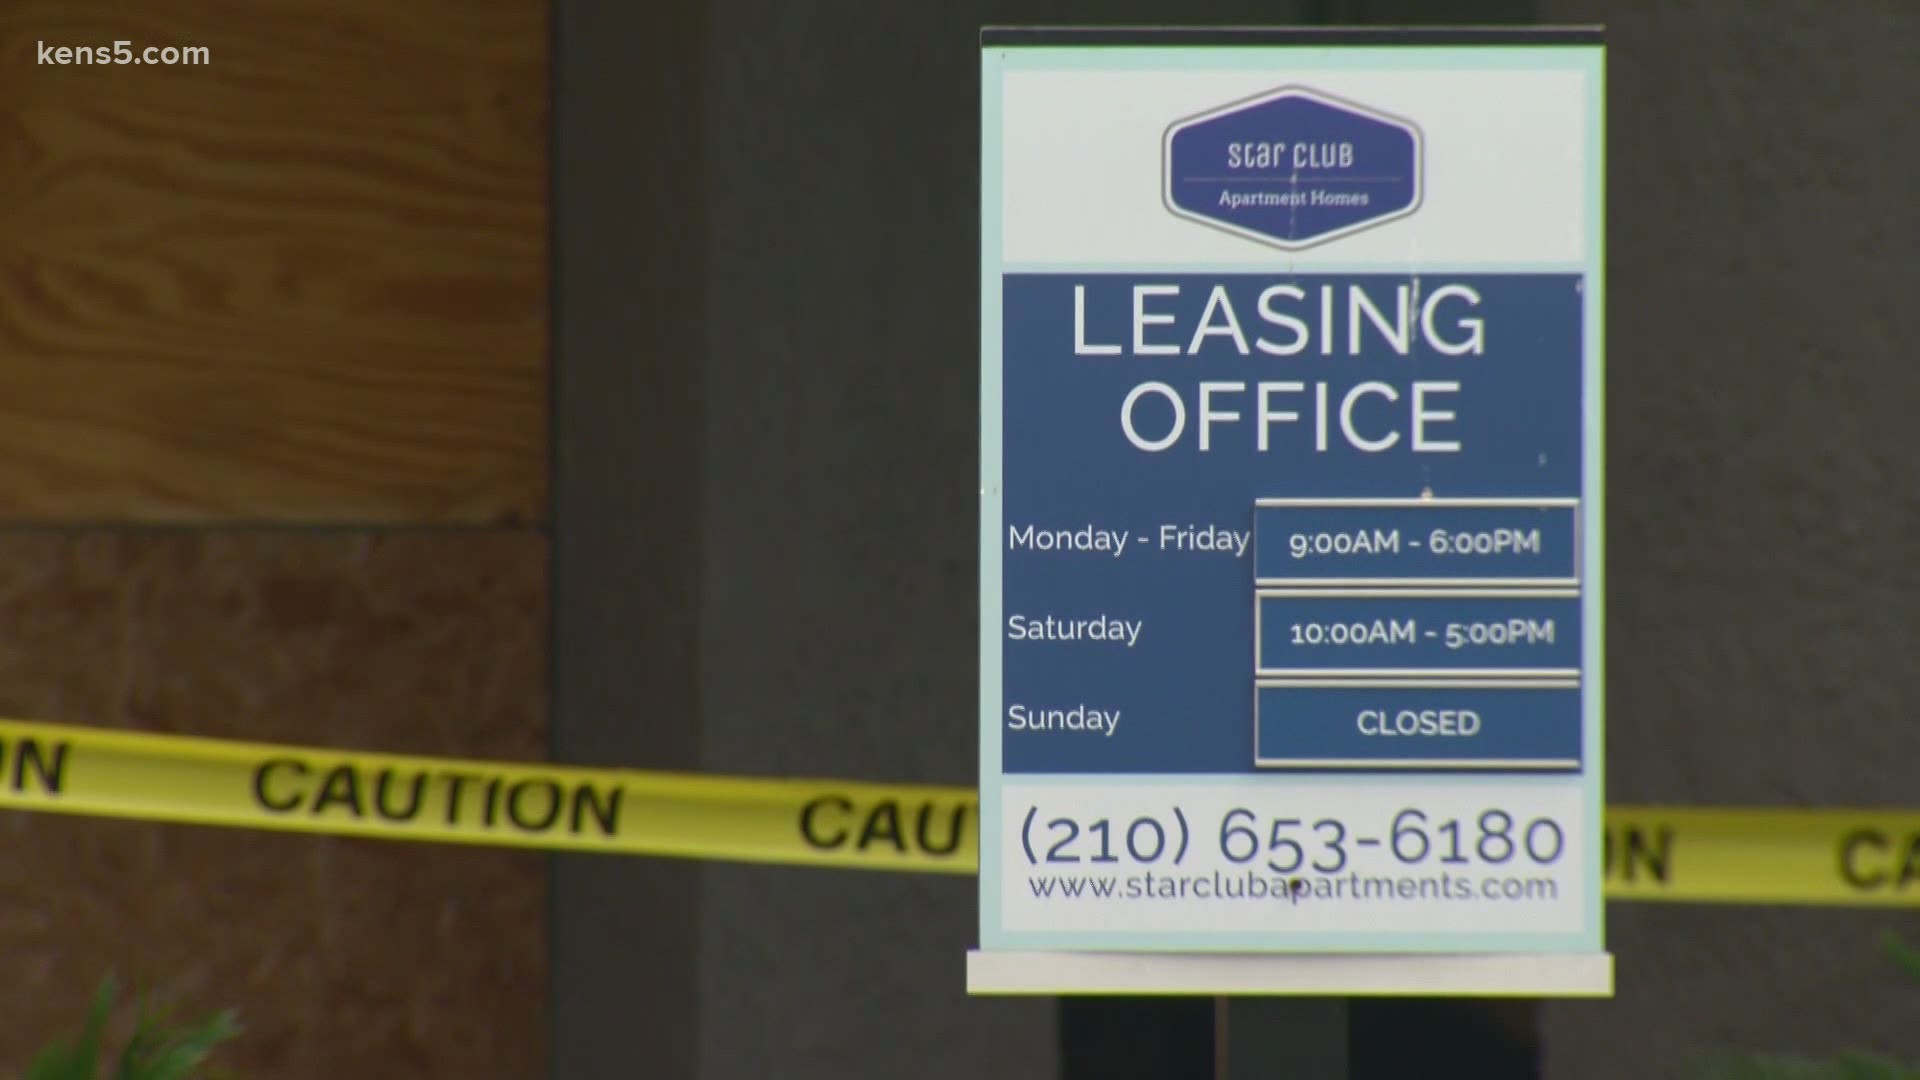 One Star Club tenant says she submitted a work order in March that has yet to be completed.